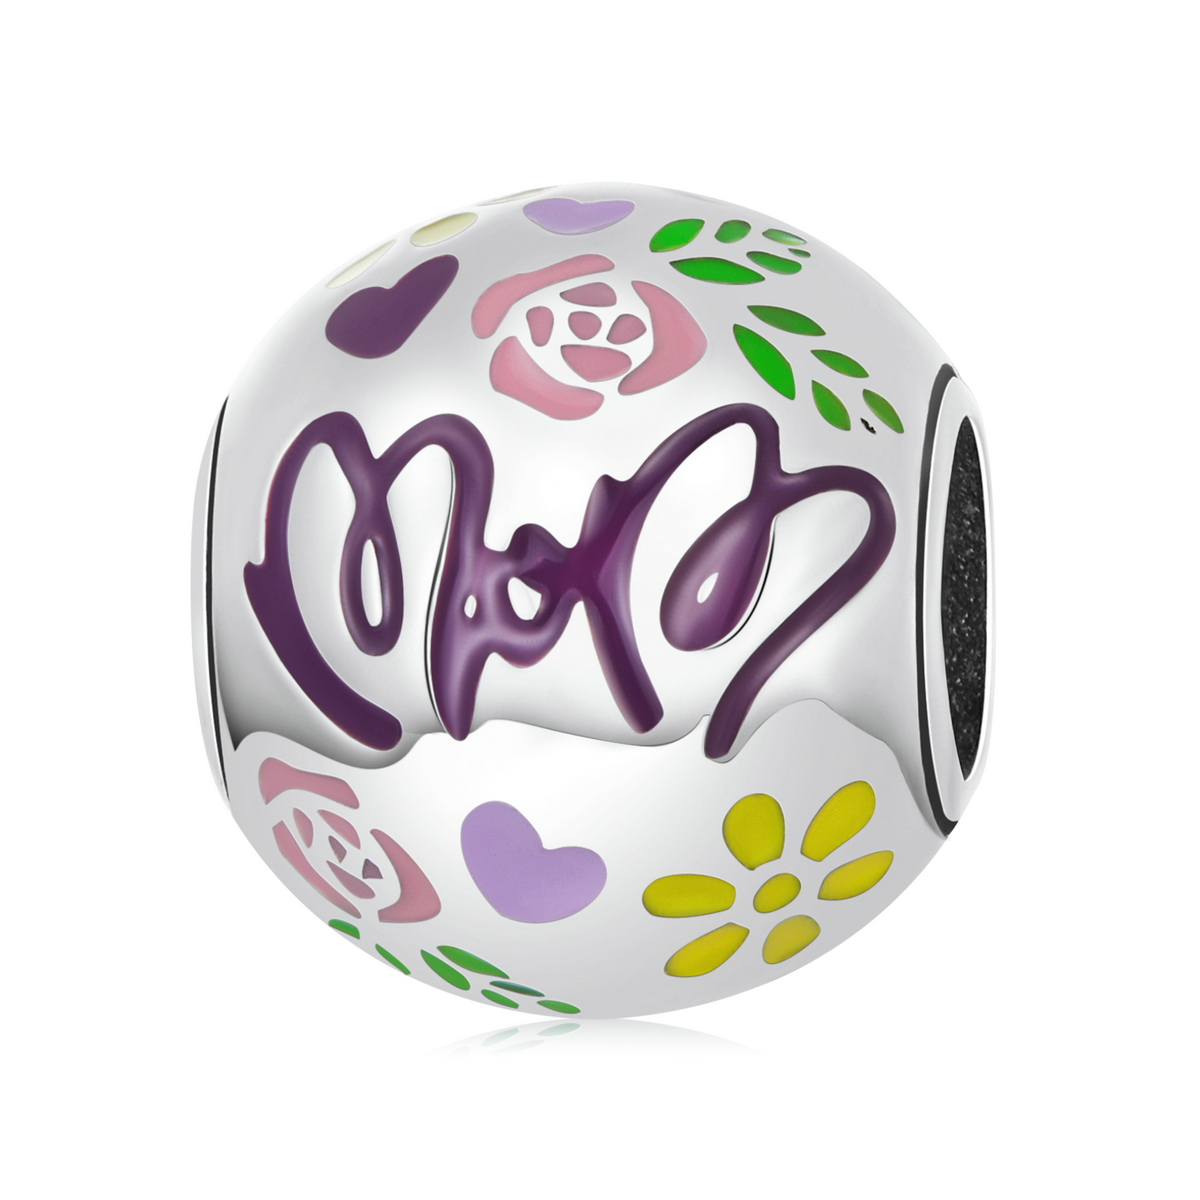 pandora style mother's day color doodles charm bsc595